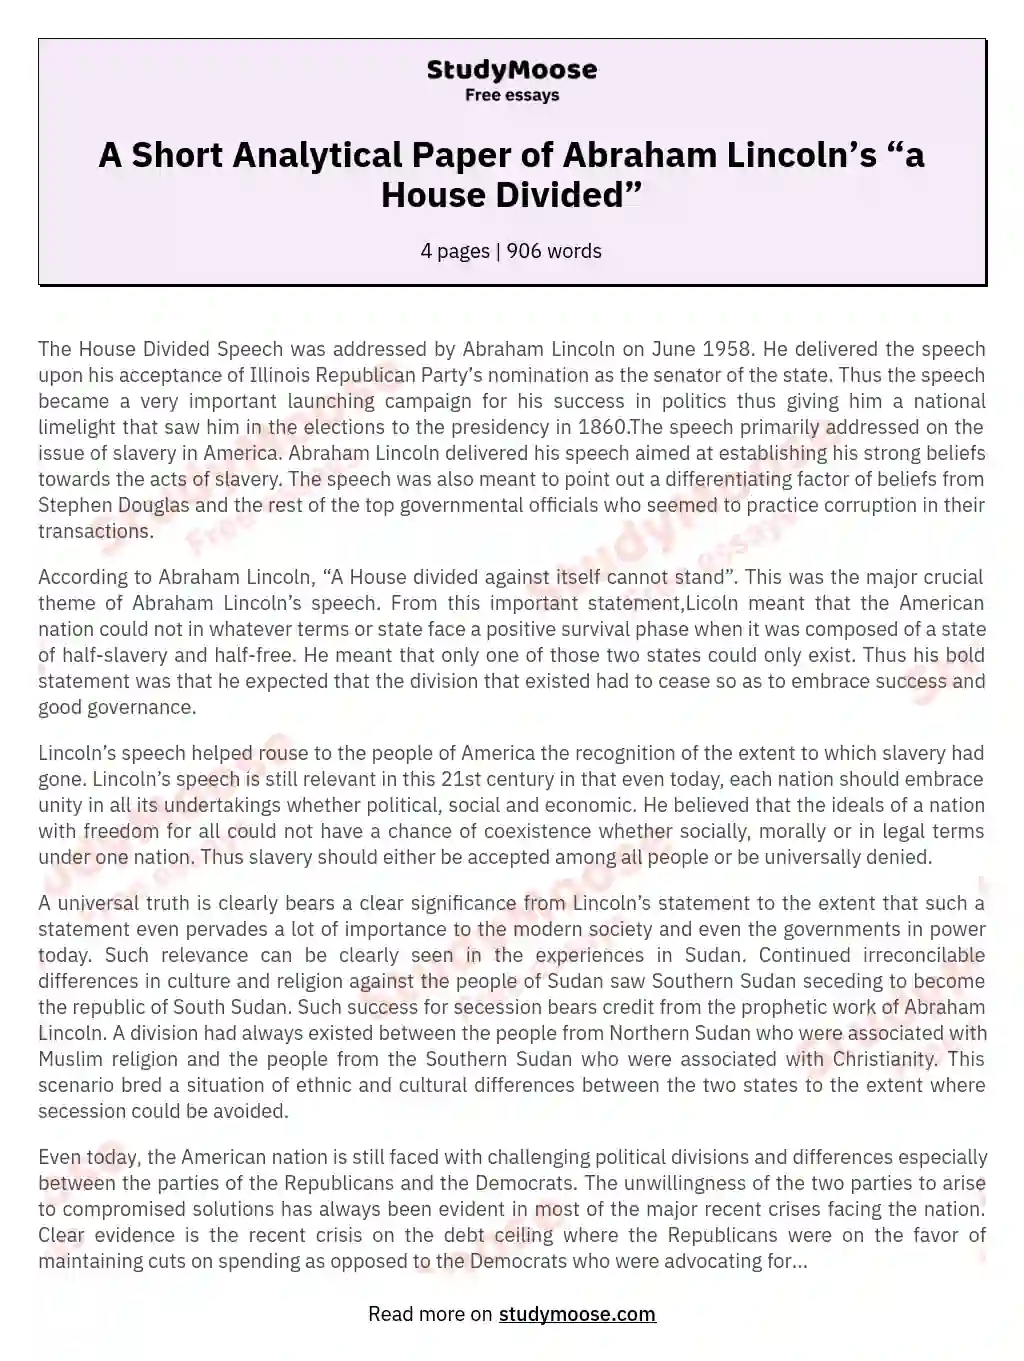 A Short Analytical Paper of Abraham Lincoln’s “a House Divided” essay